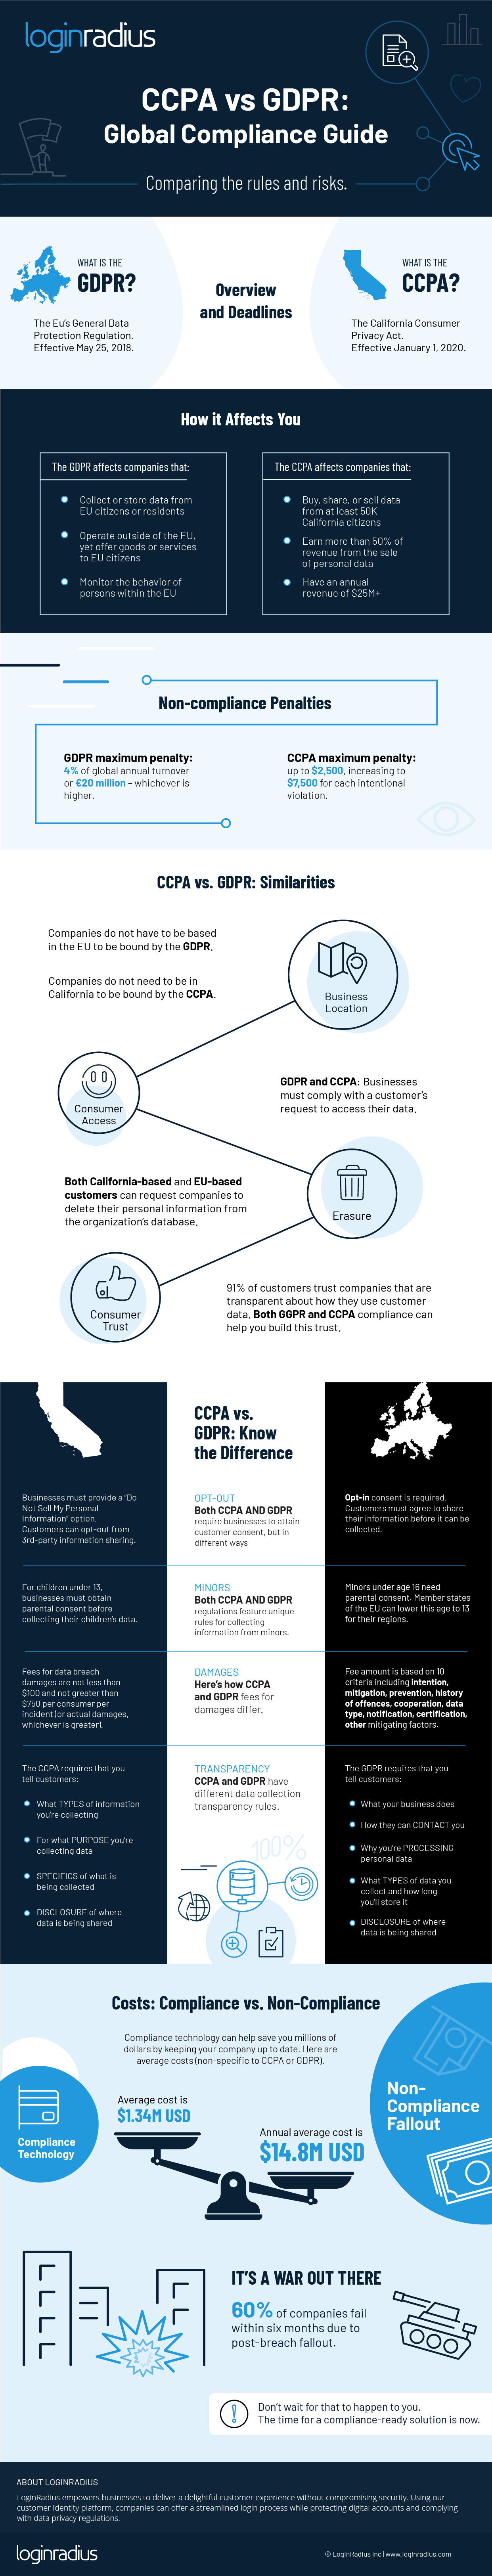 CCPA vs GDPR: A Guide to Compliance 